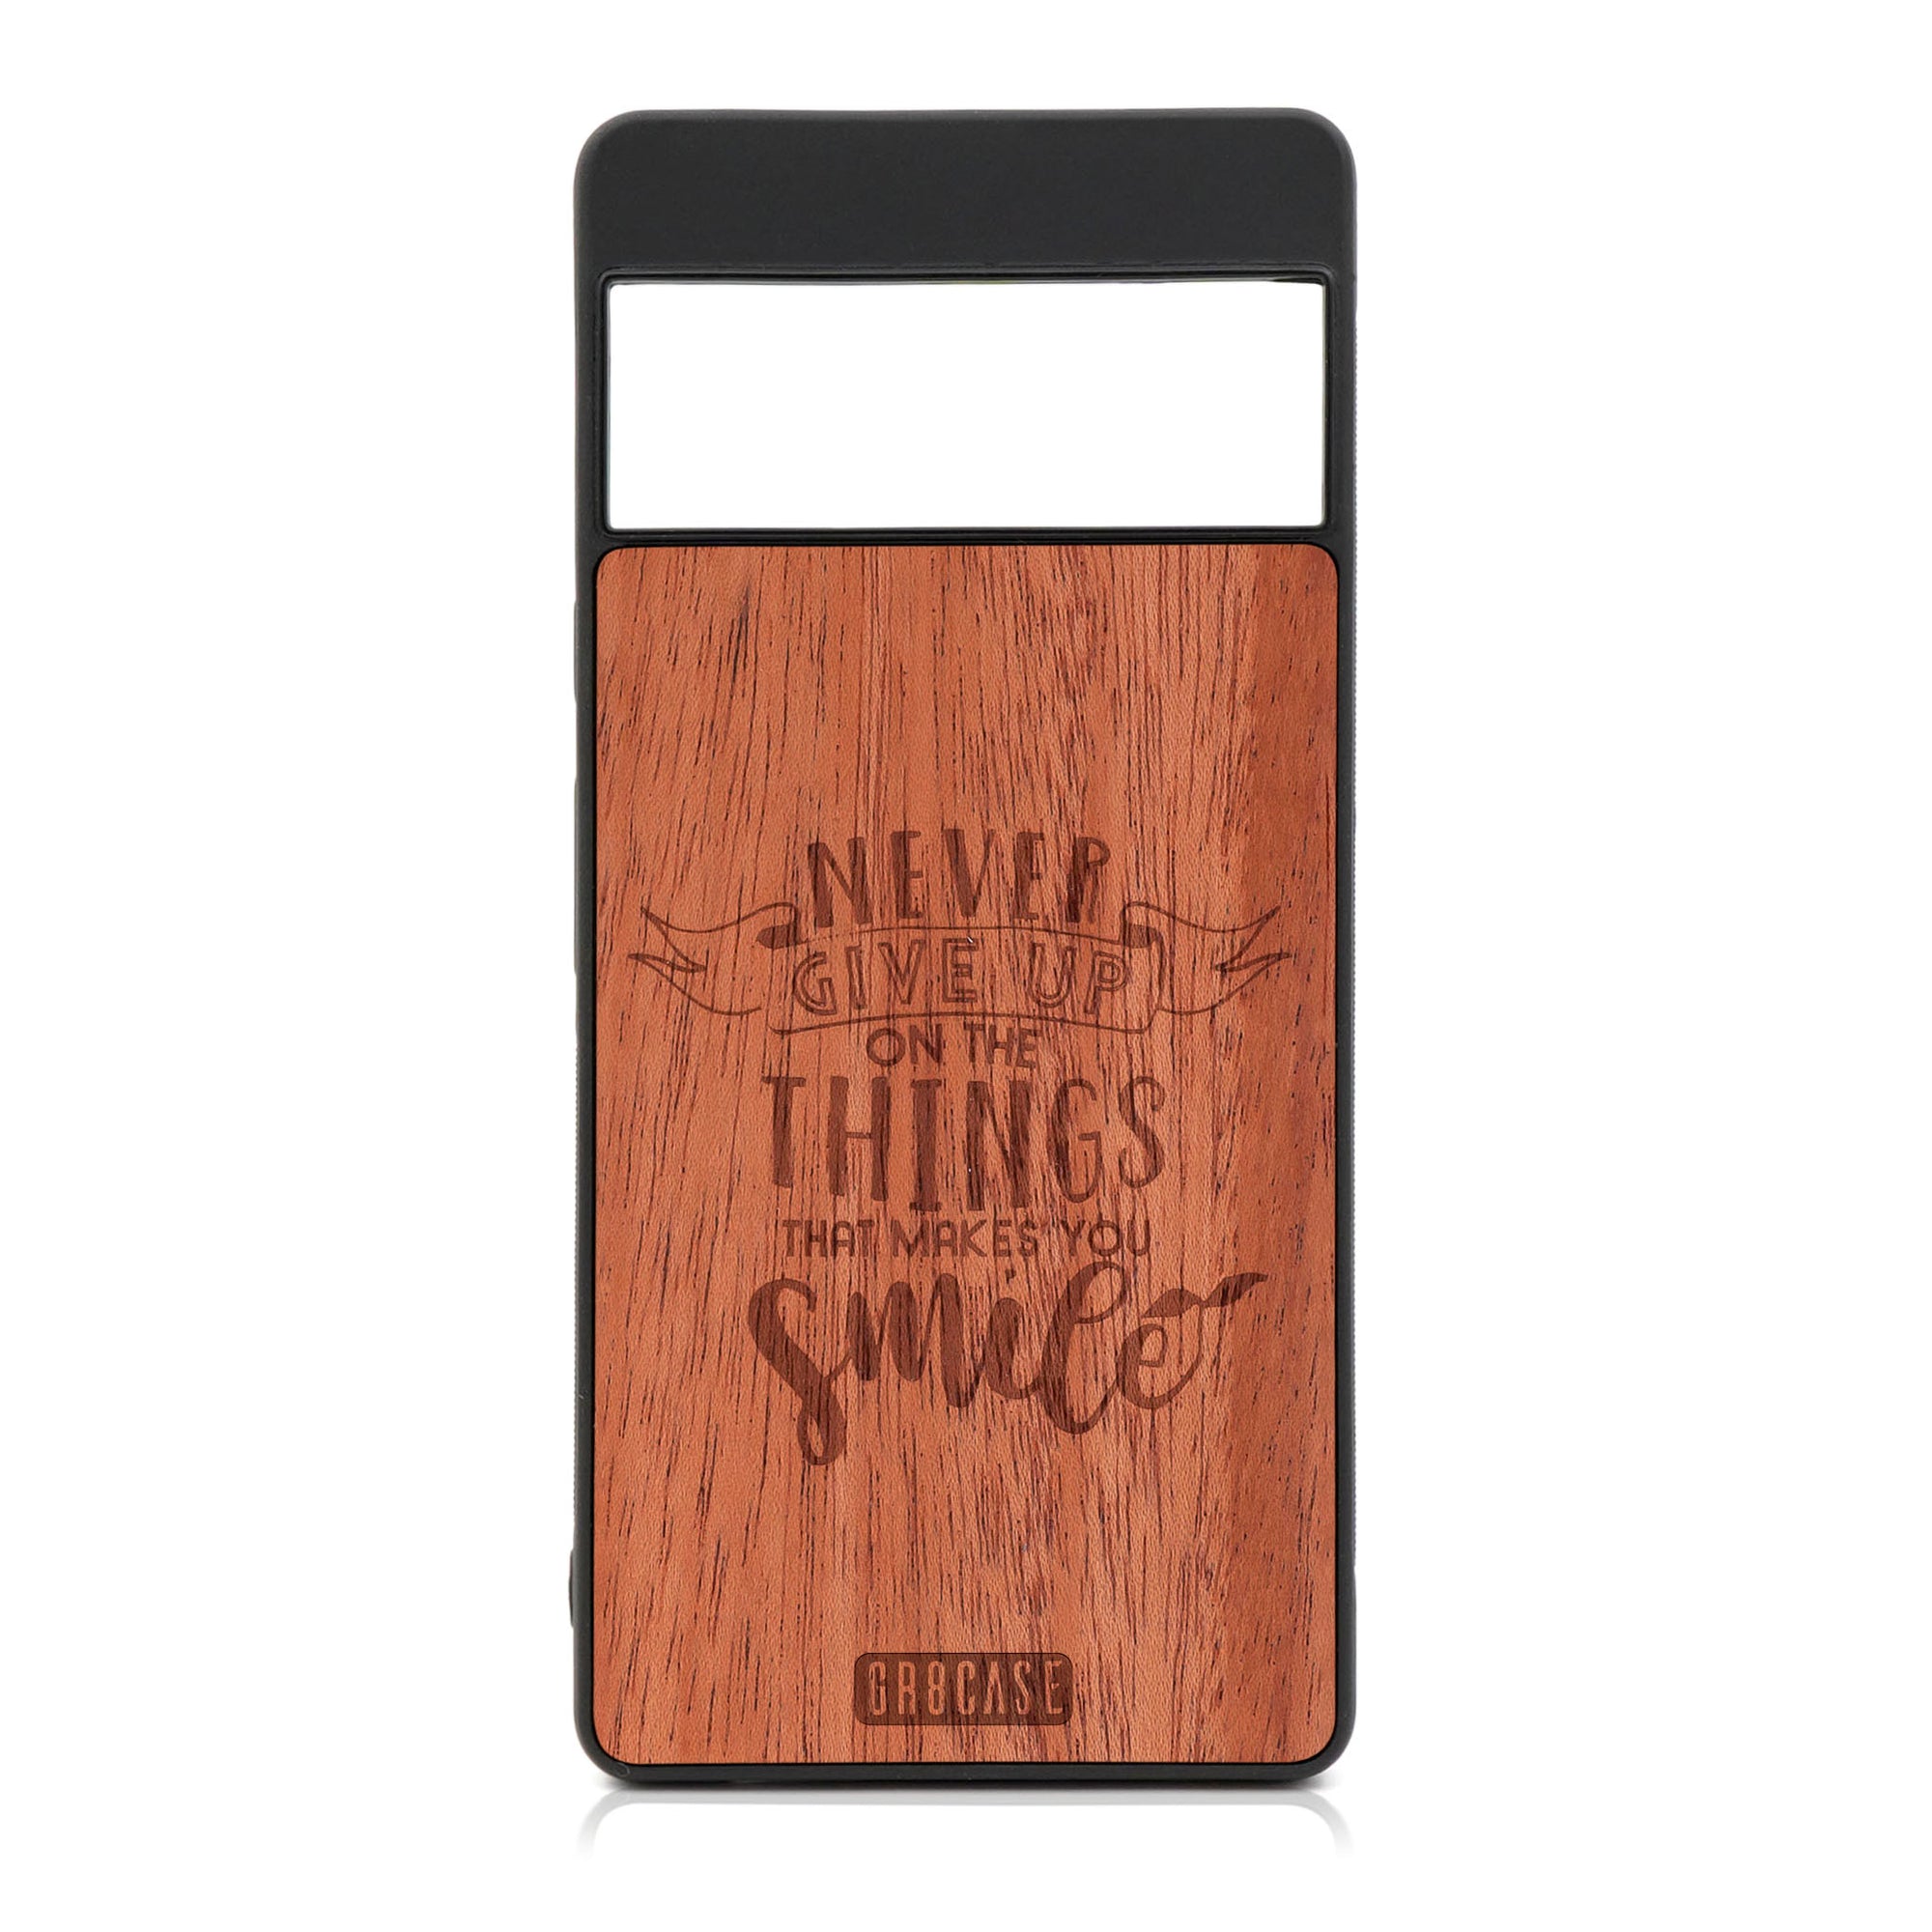 Never Give Up On The Things That Make You Smile Design Wood Case For Google Pixel 6